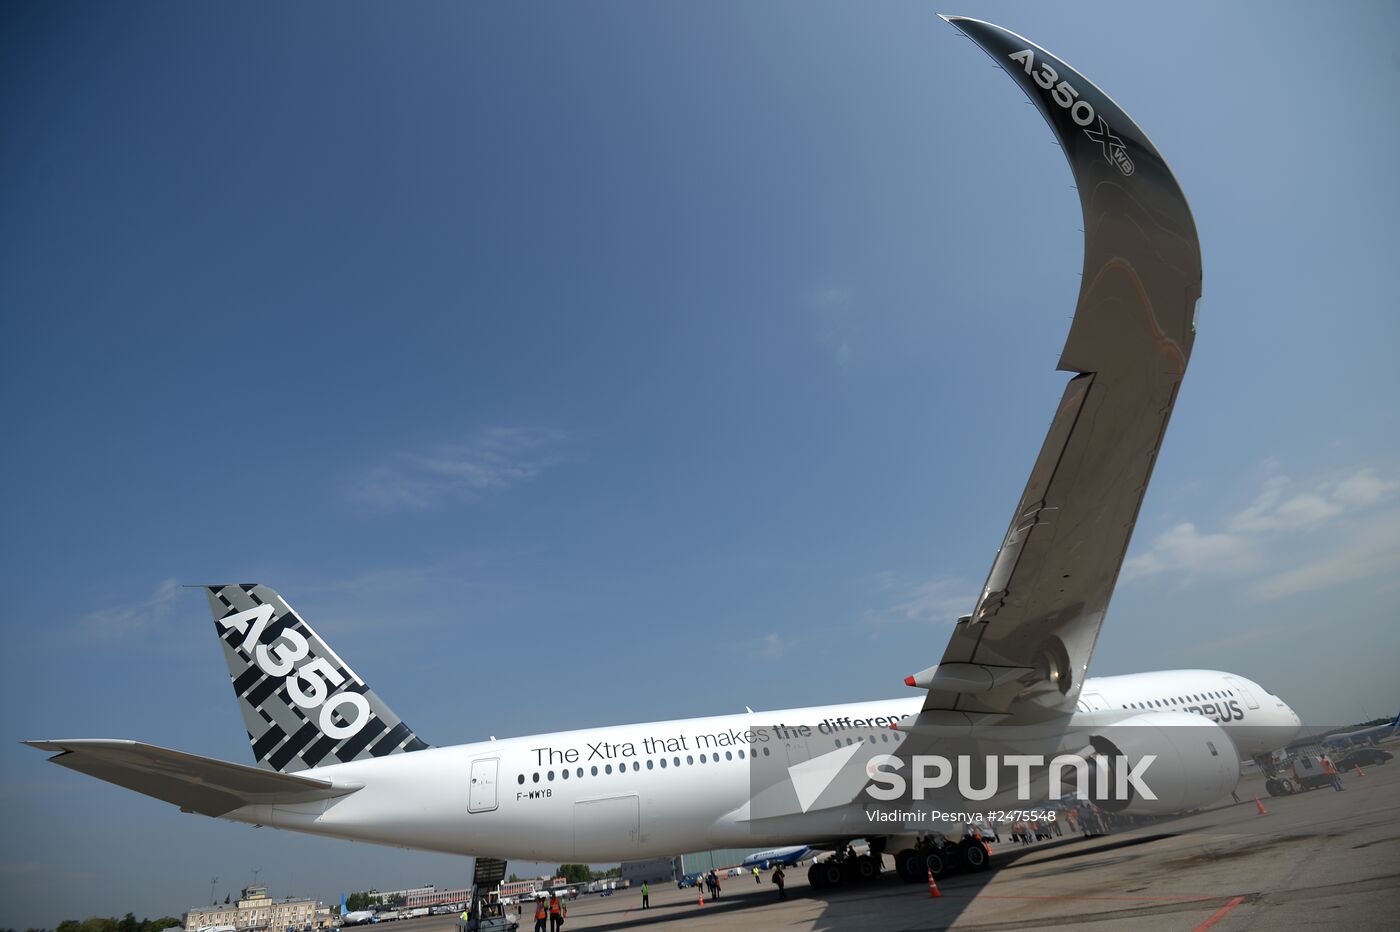 New passenger plane, Airbus A350 XWB, lands in Moscow's Sheremetyevo airport